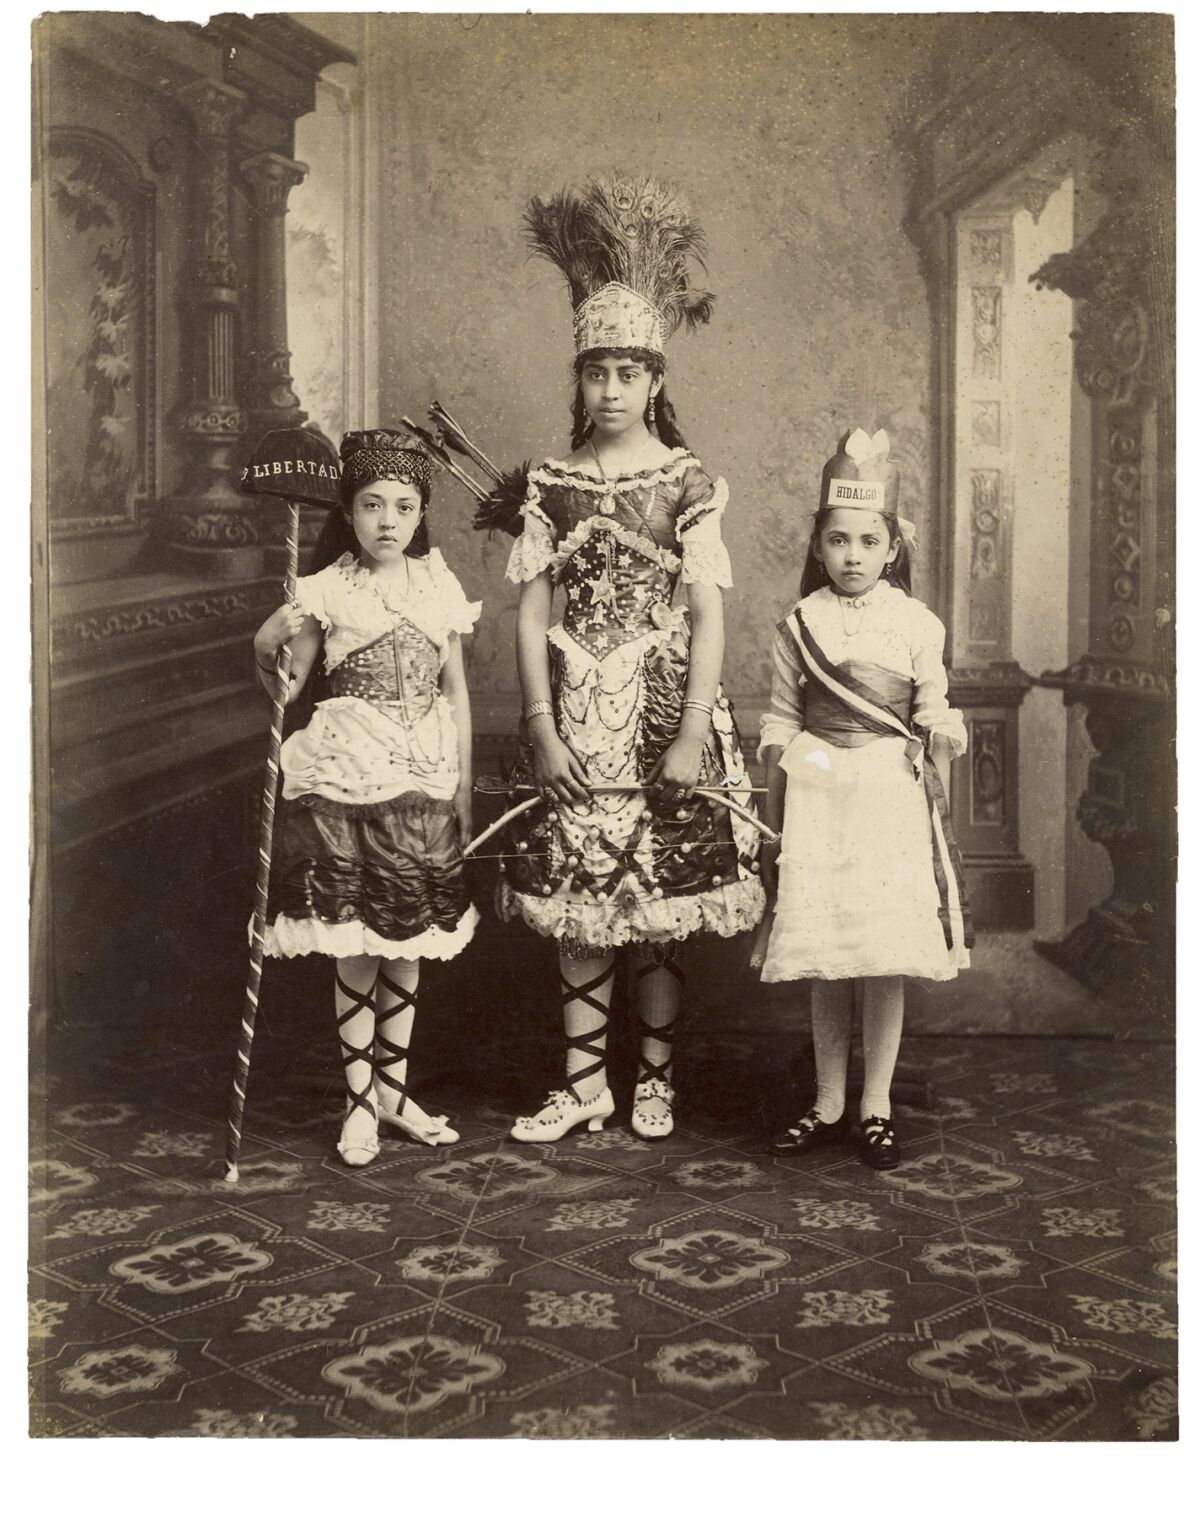 A sepia image shows three little girls in fantastical outfits, one with a headdress, in a carpeted foyer